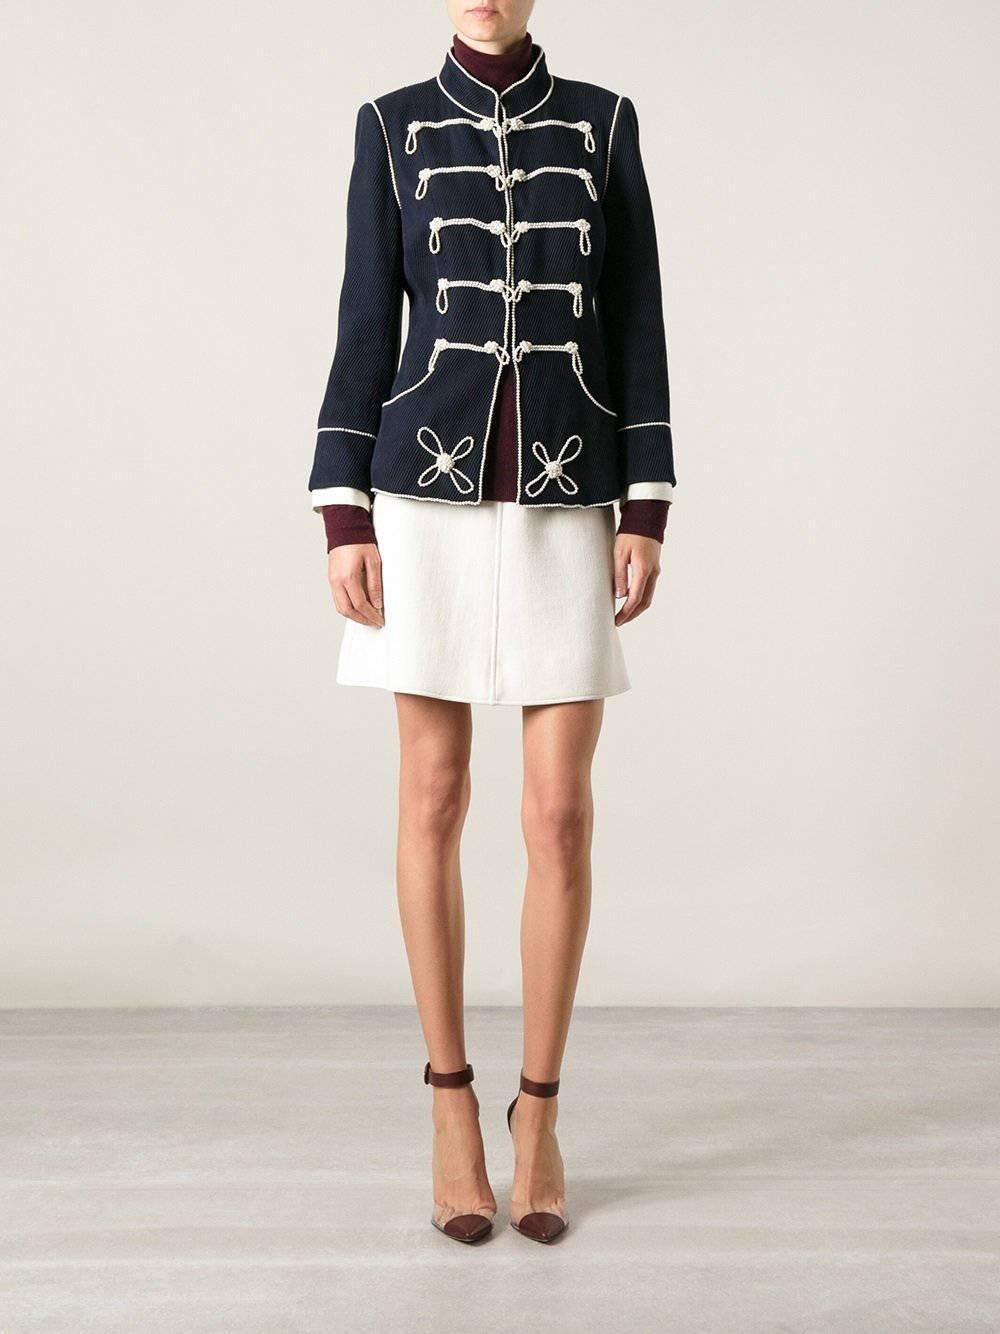 Chanel 09P Limited Edition Military Pearl Beaded Jacket and Skirt Suit.  Navy blue colored jacket is decorated with pearl beads and has removable ivory cuffs.  Skirt has high waistband, 2 inverted pleats at front, 1 inverted pleat at back, and